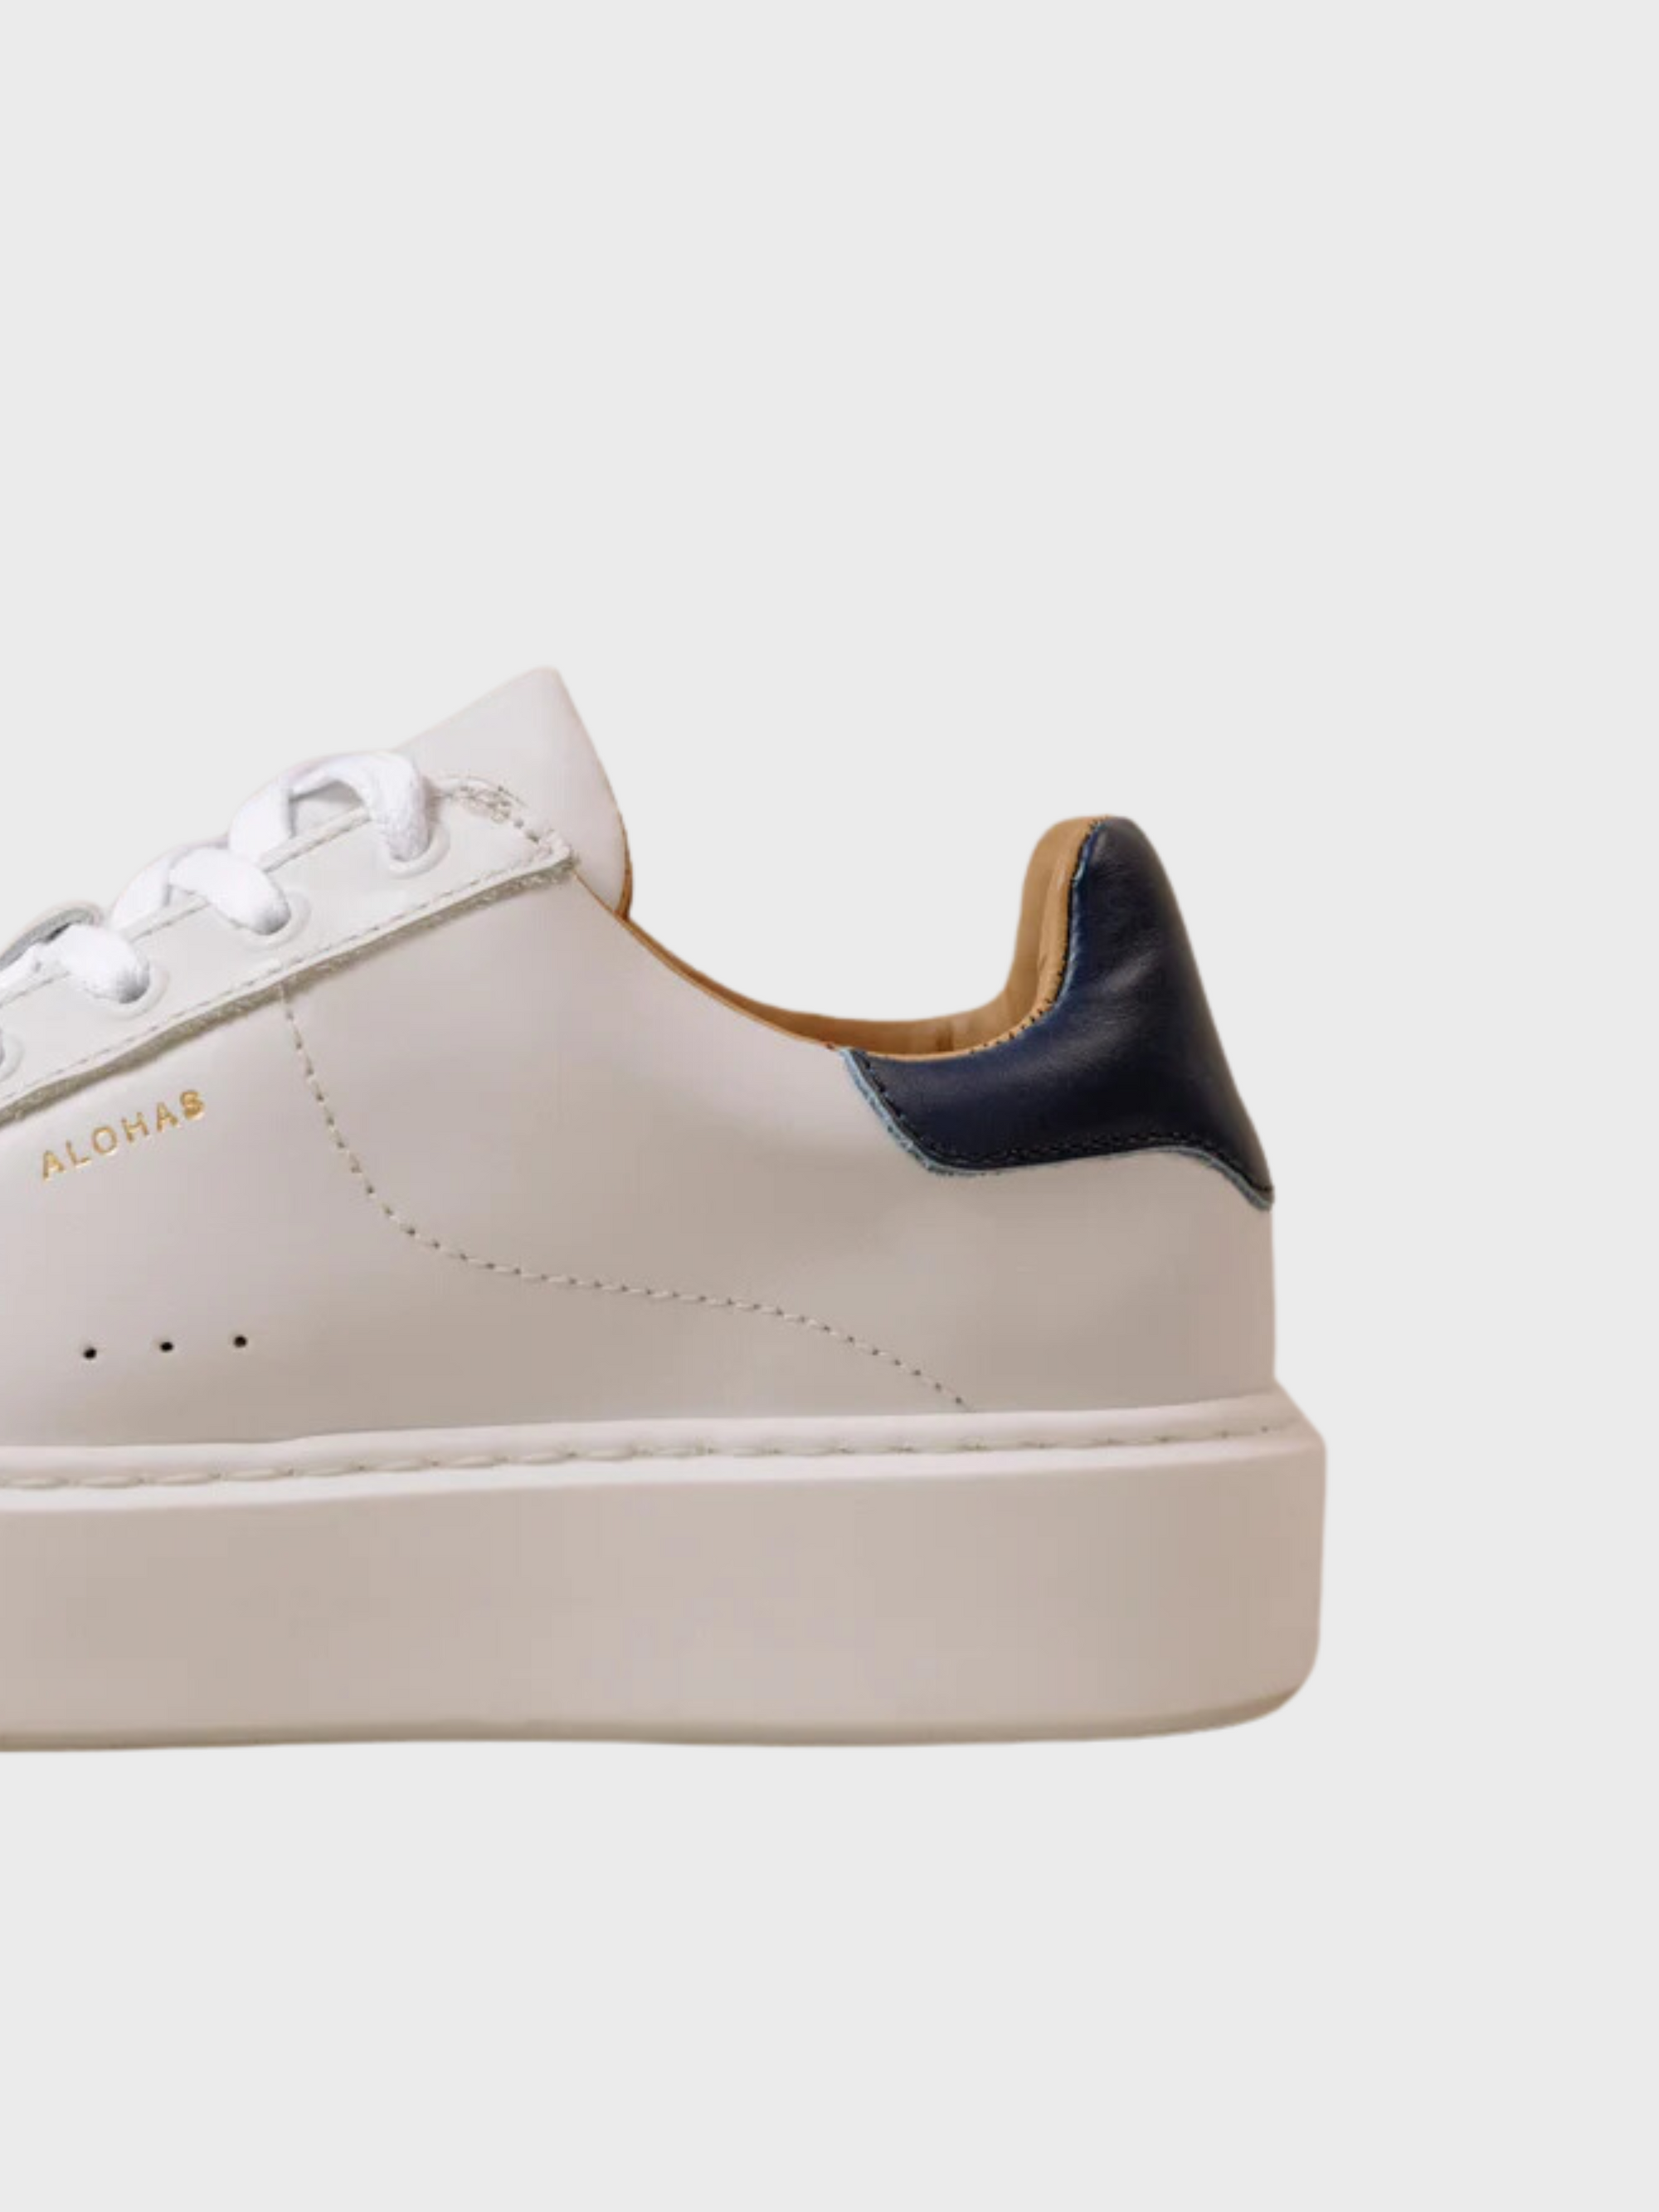 ALOHAS tb.65 Sneaker Bright White Navy-Sneakers-West of Woodward Boutique-Vancouver-Canada